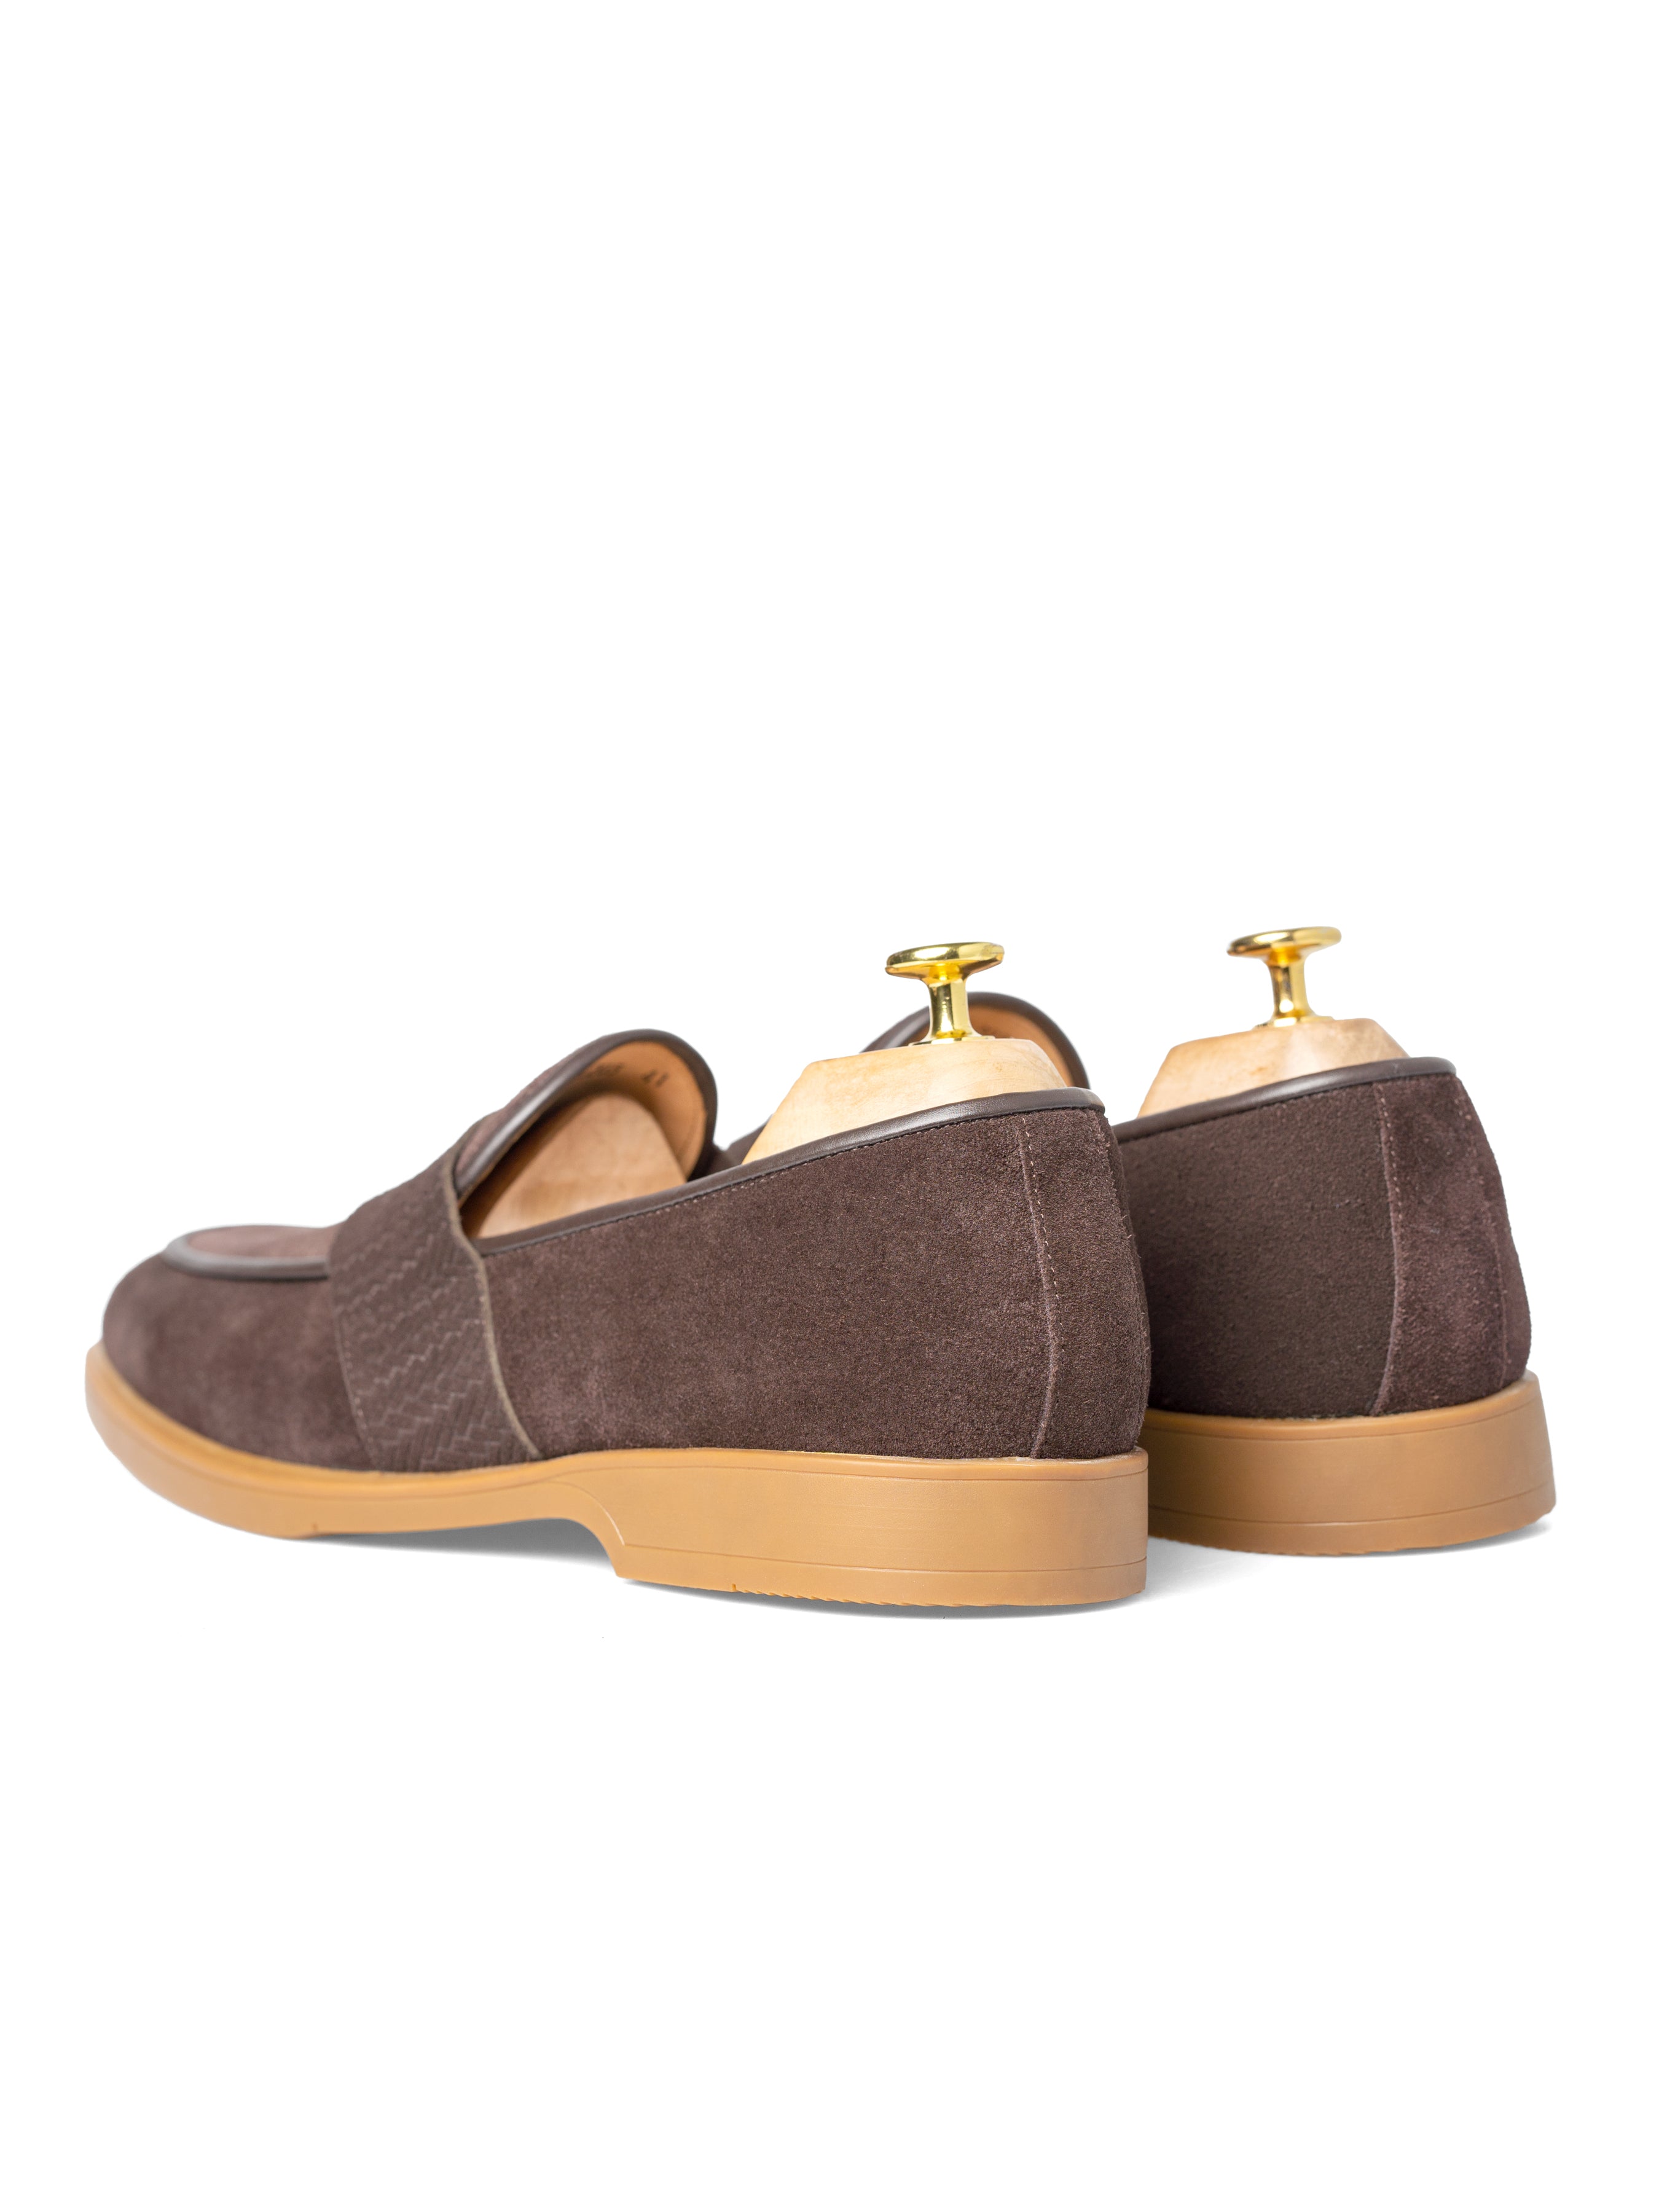 Belgian Loafer Penny - Coffee Suede Leather (Soflex Sole) - Zeve Shoes